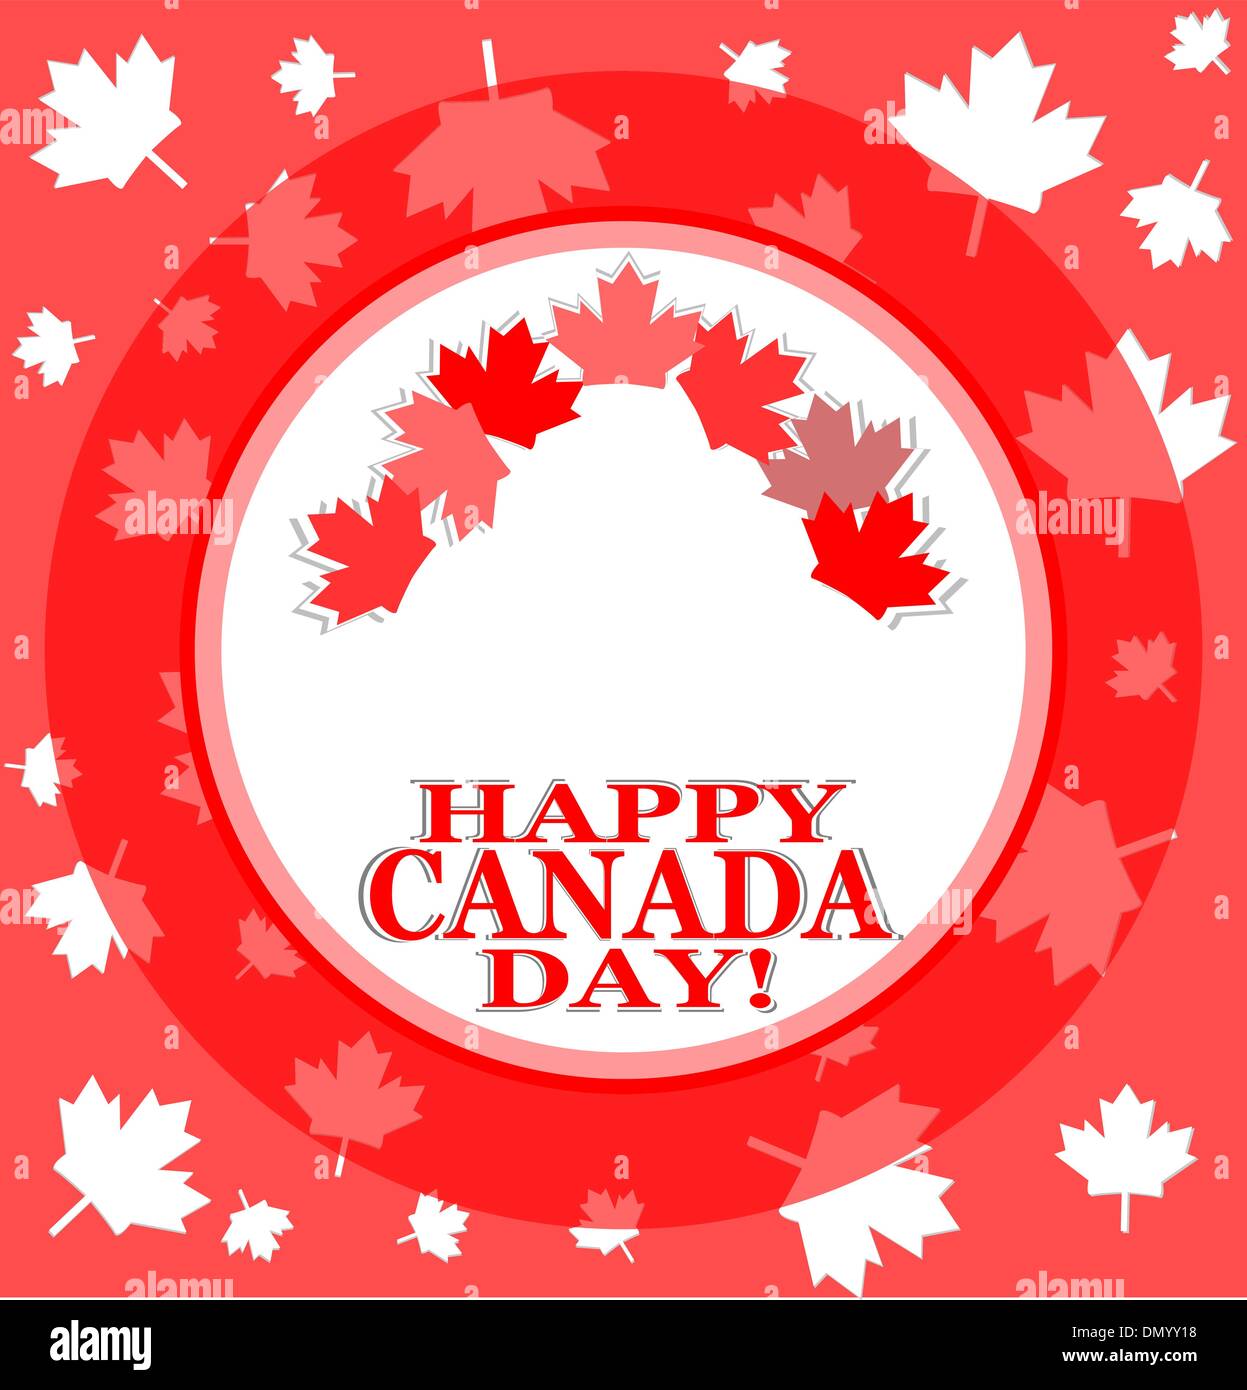 Happy canada day background Stock Vector